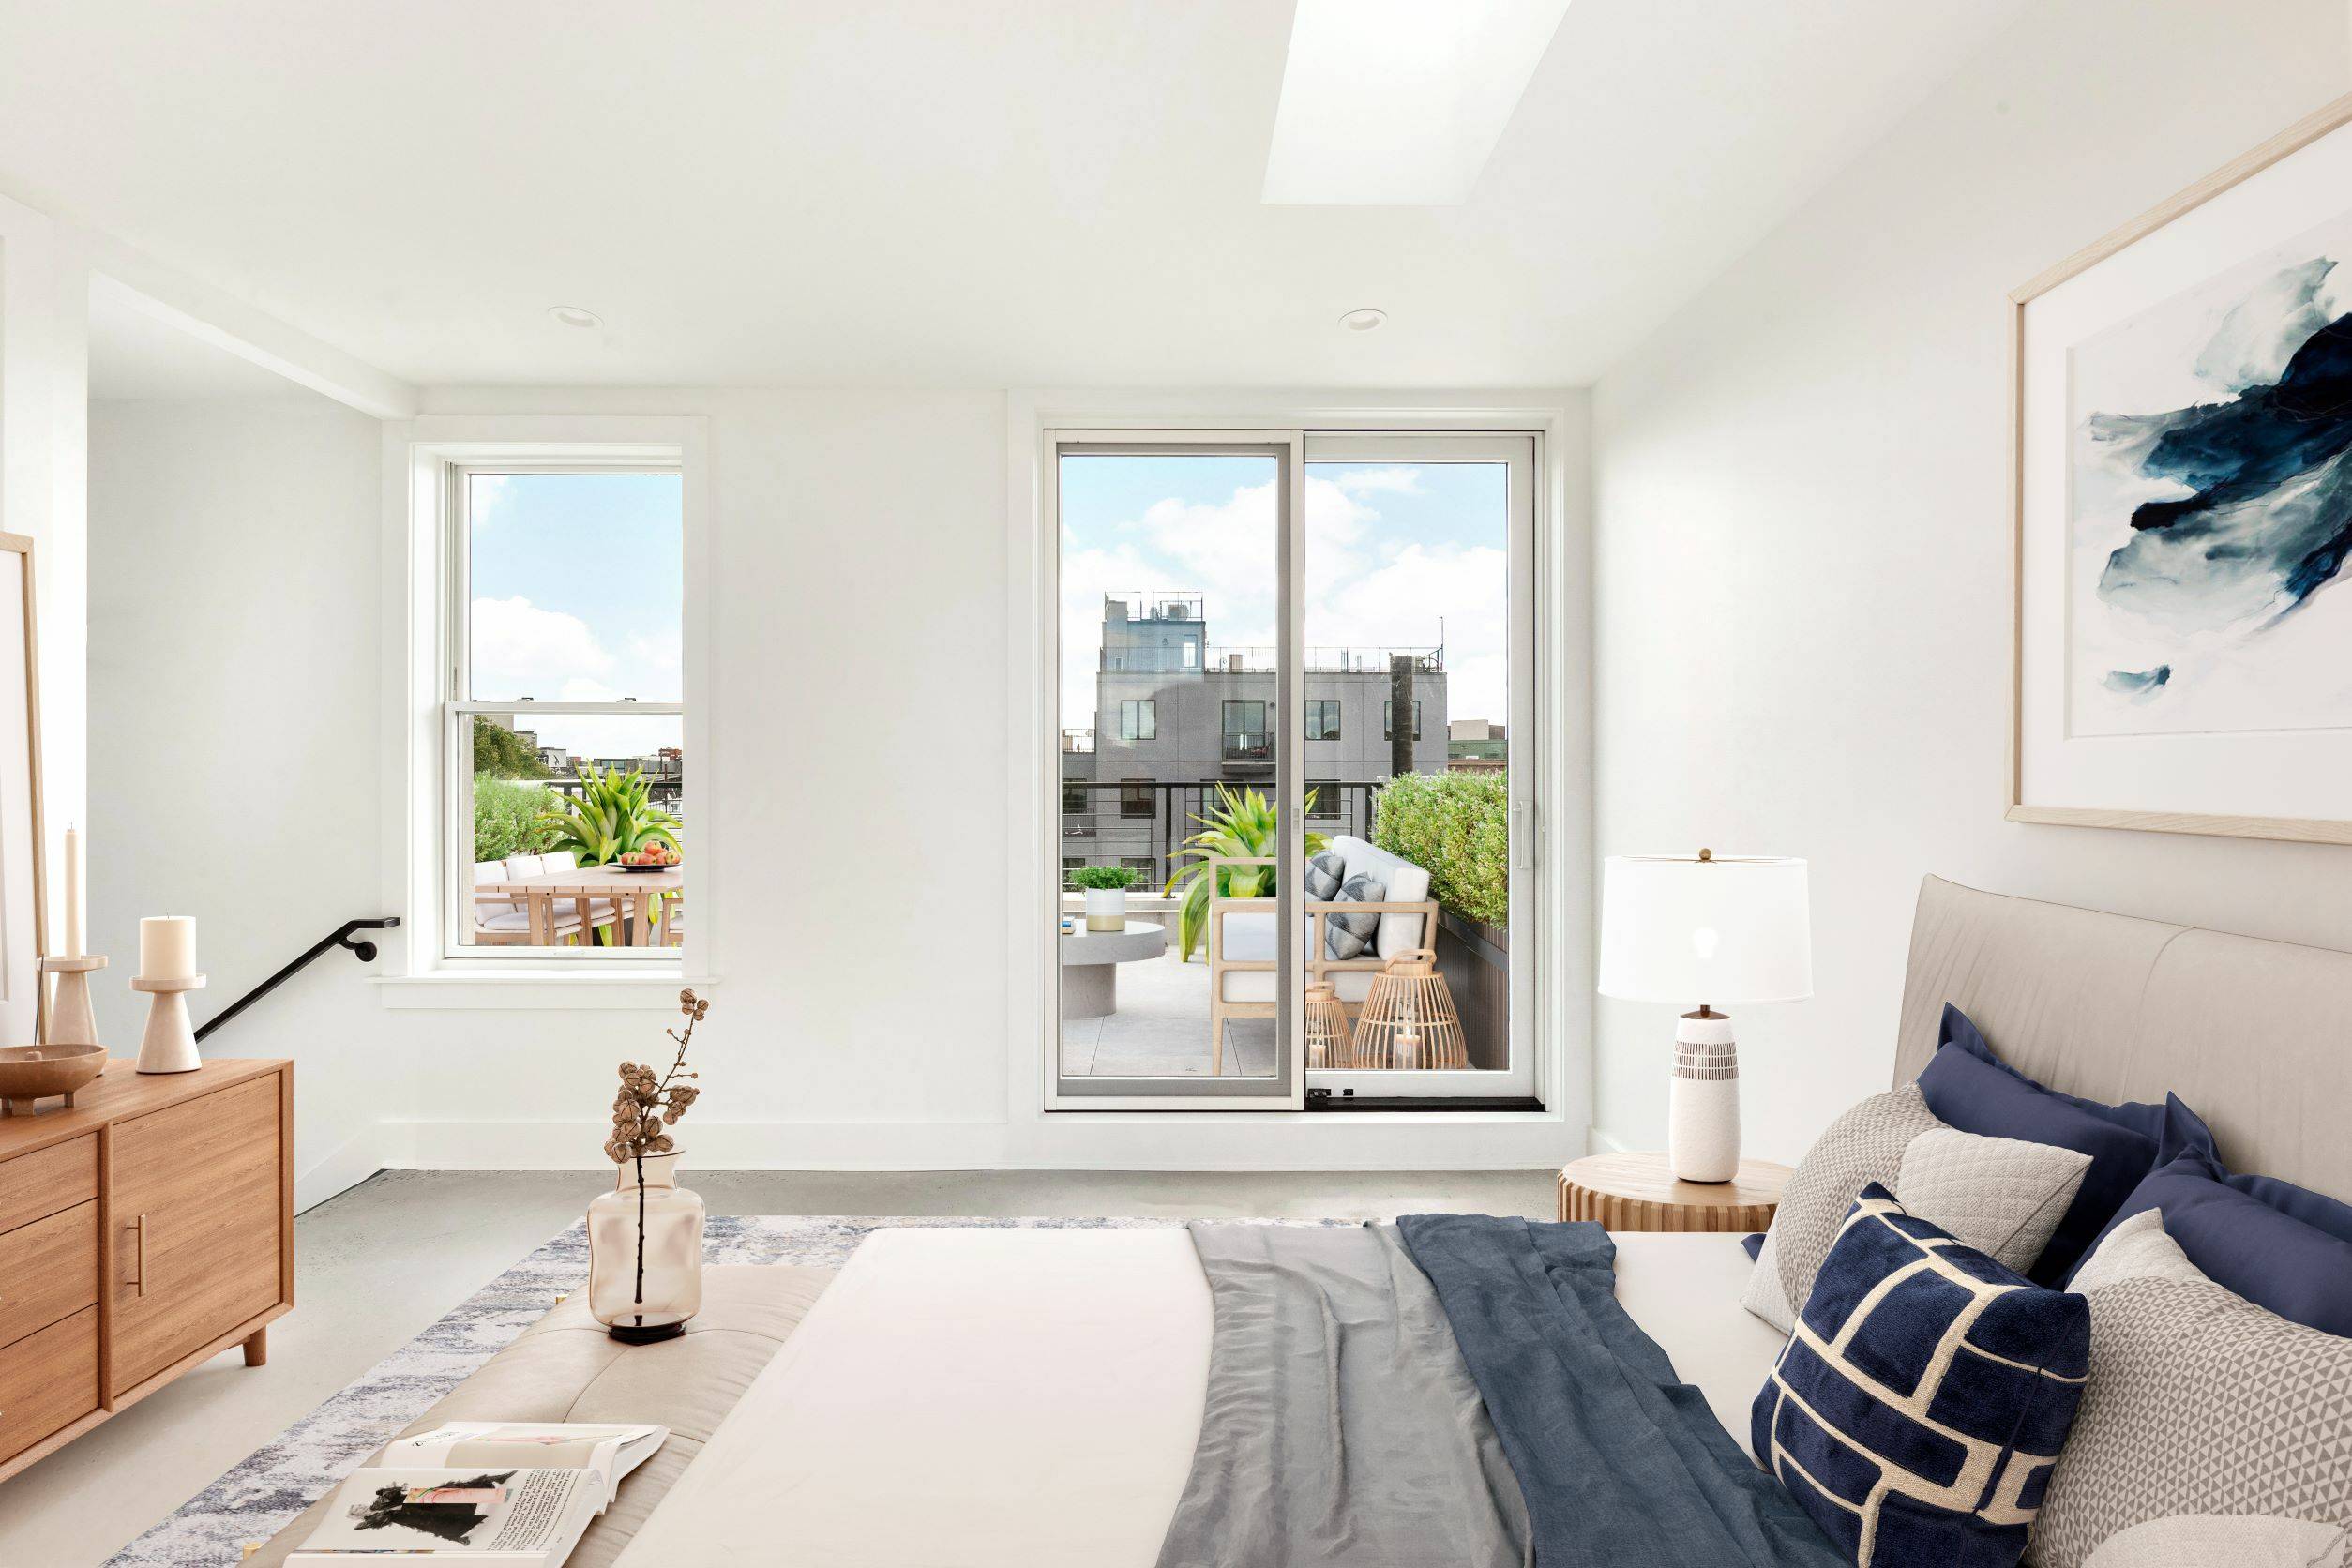 Introducing this brand new Bushwick duplex penthouse suffused with natural light, a chic 2 bedroom, 1 bathroom condo graced with statement finishes that exude luxury and style.